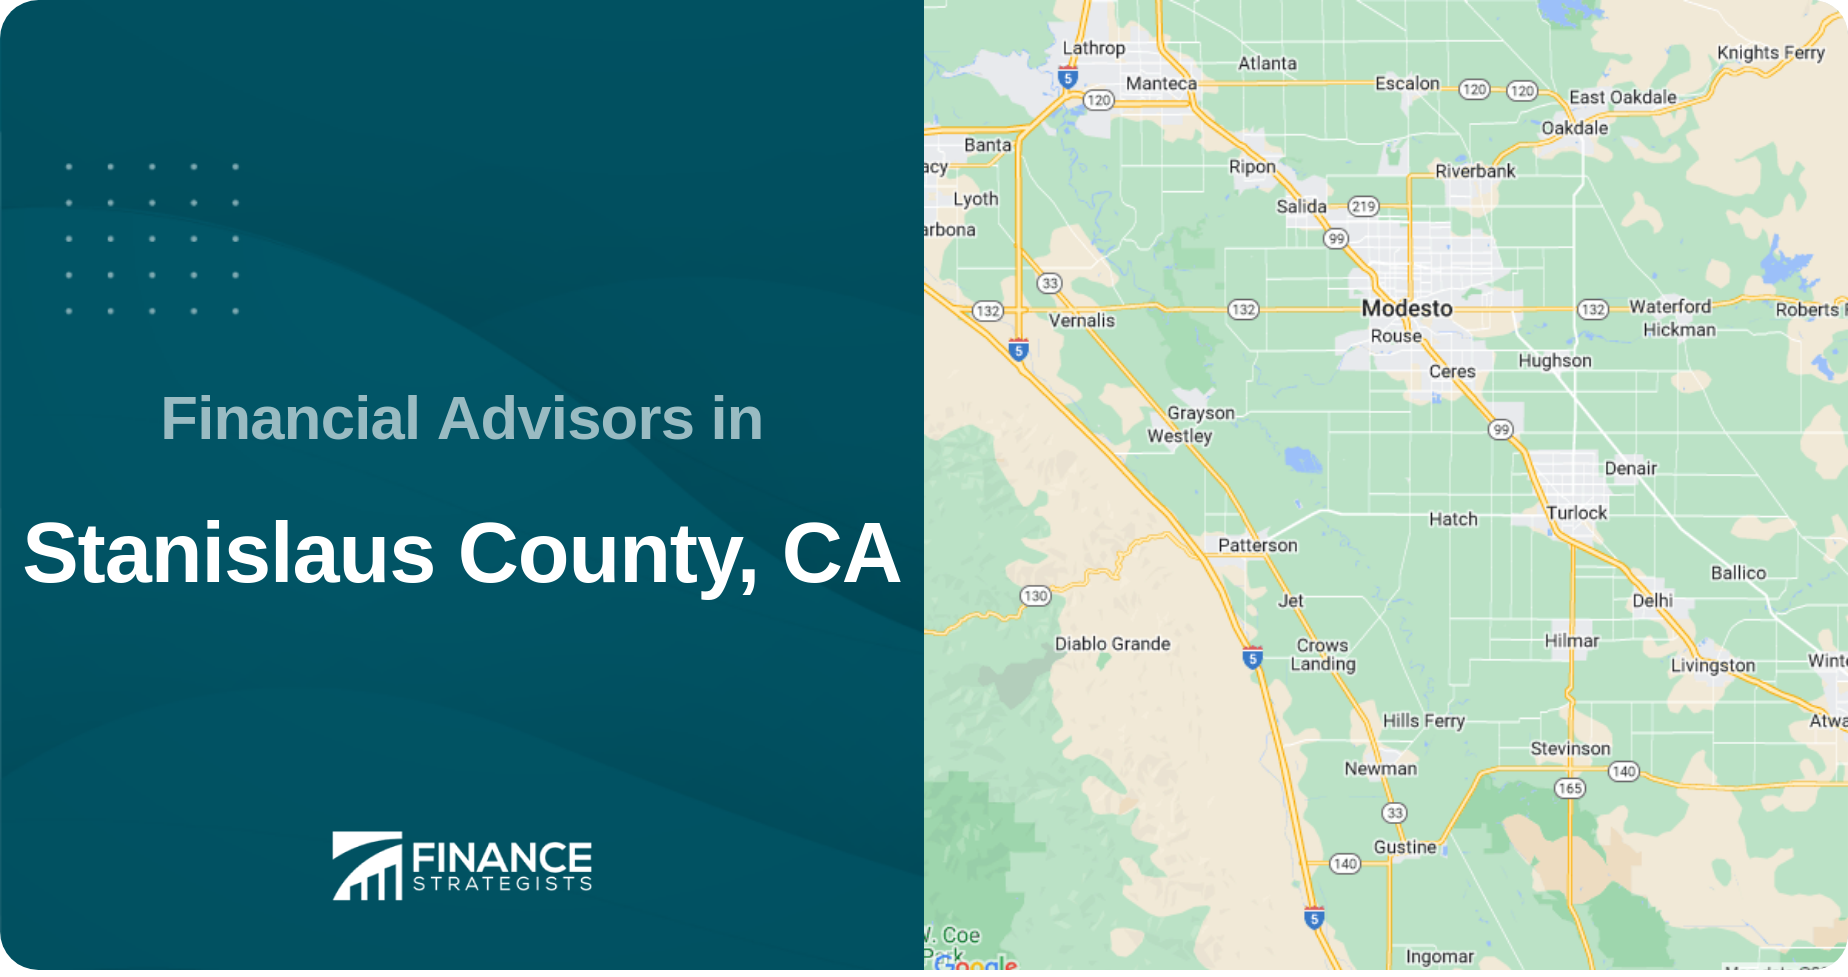 Financial Advisors in Stanislaus County, CA